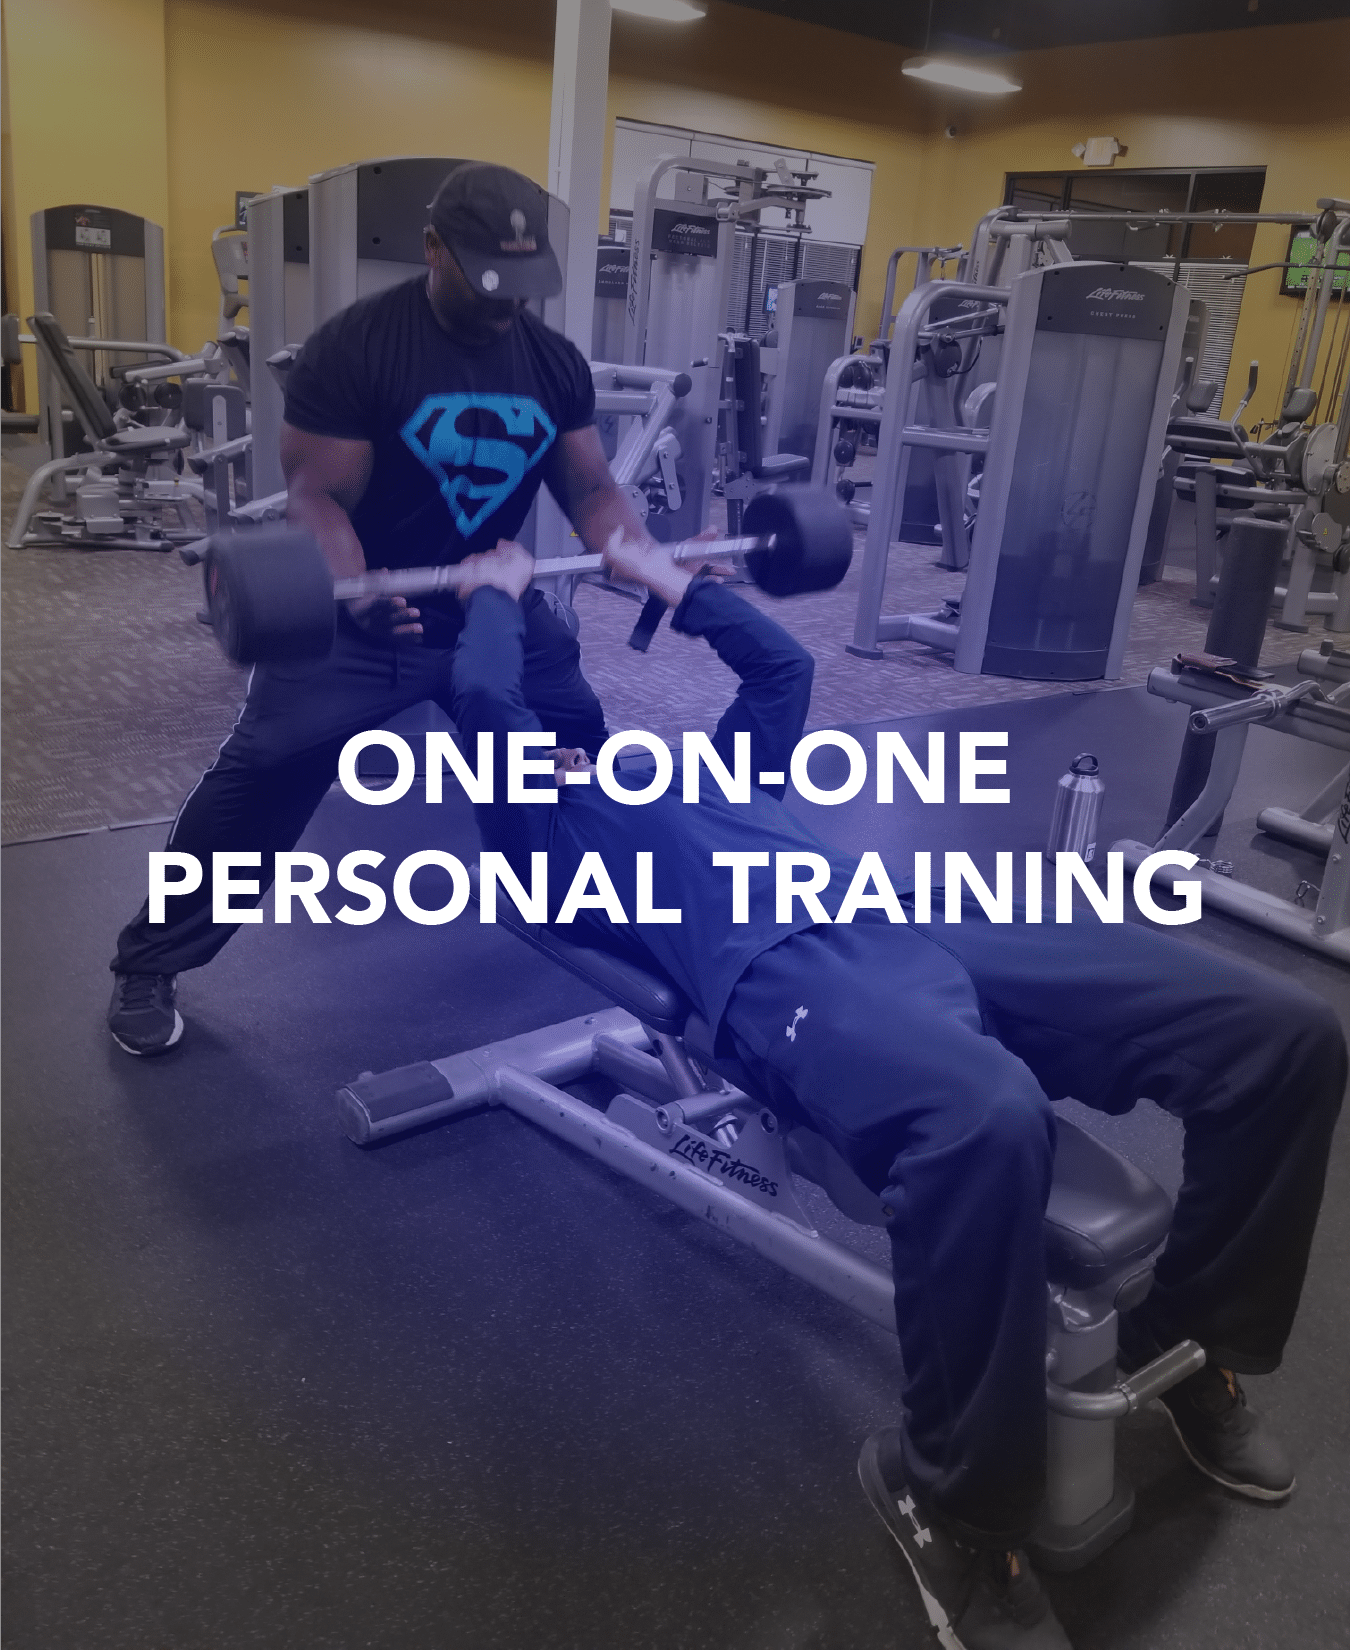 ONE-ON-ONE PERSONAL TRAINING